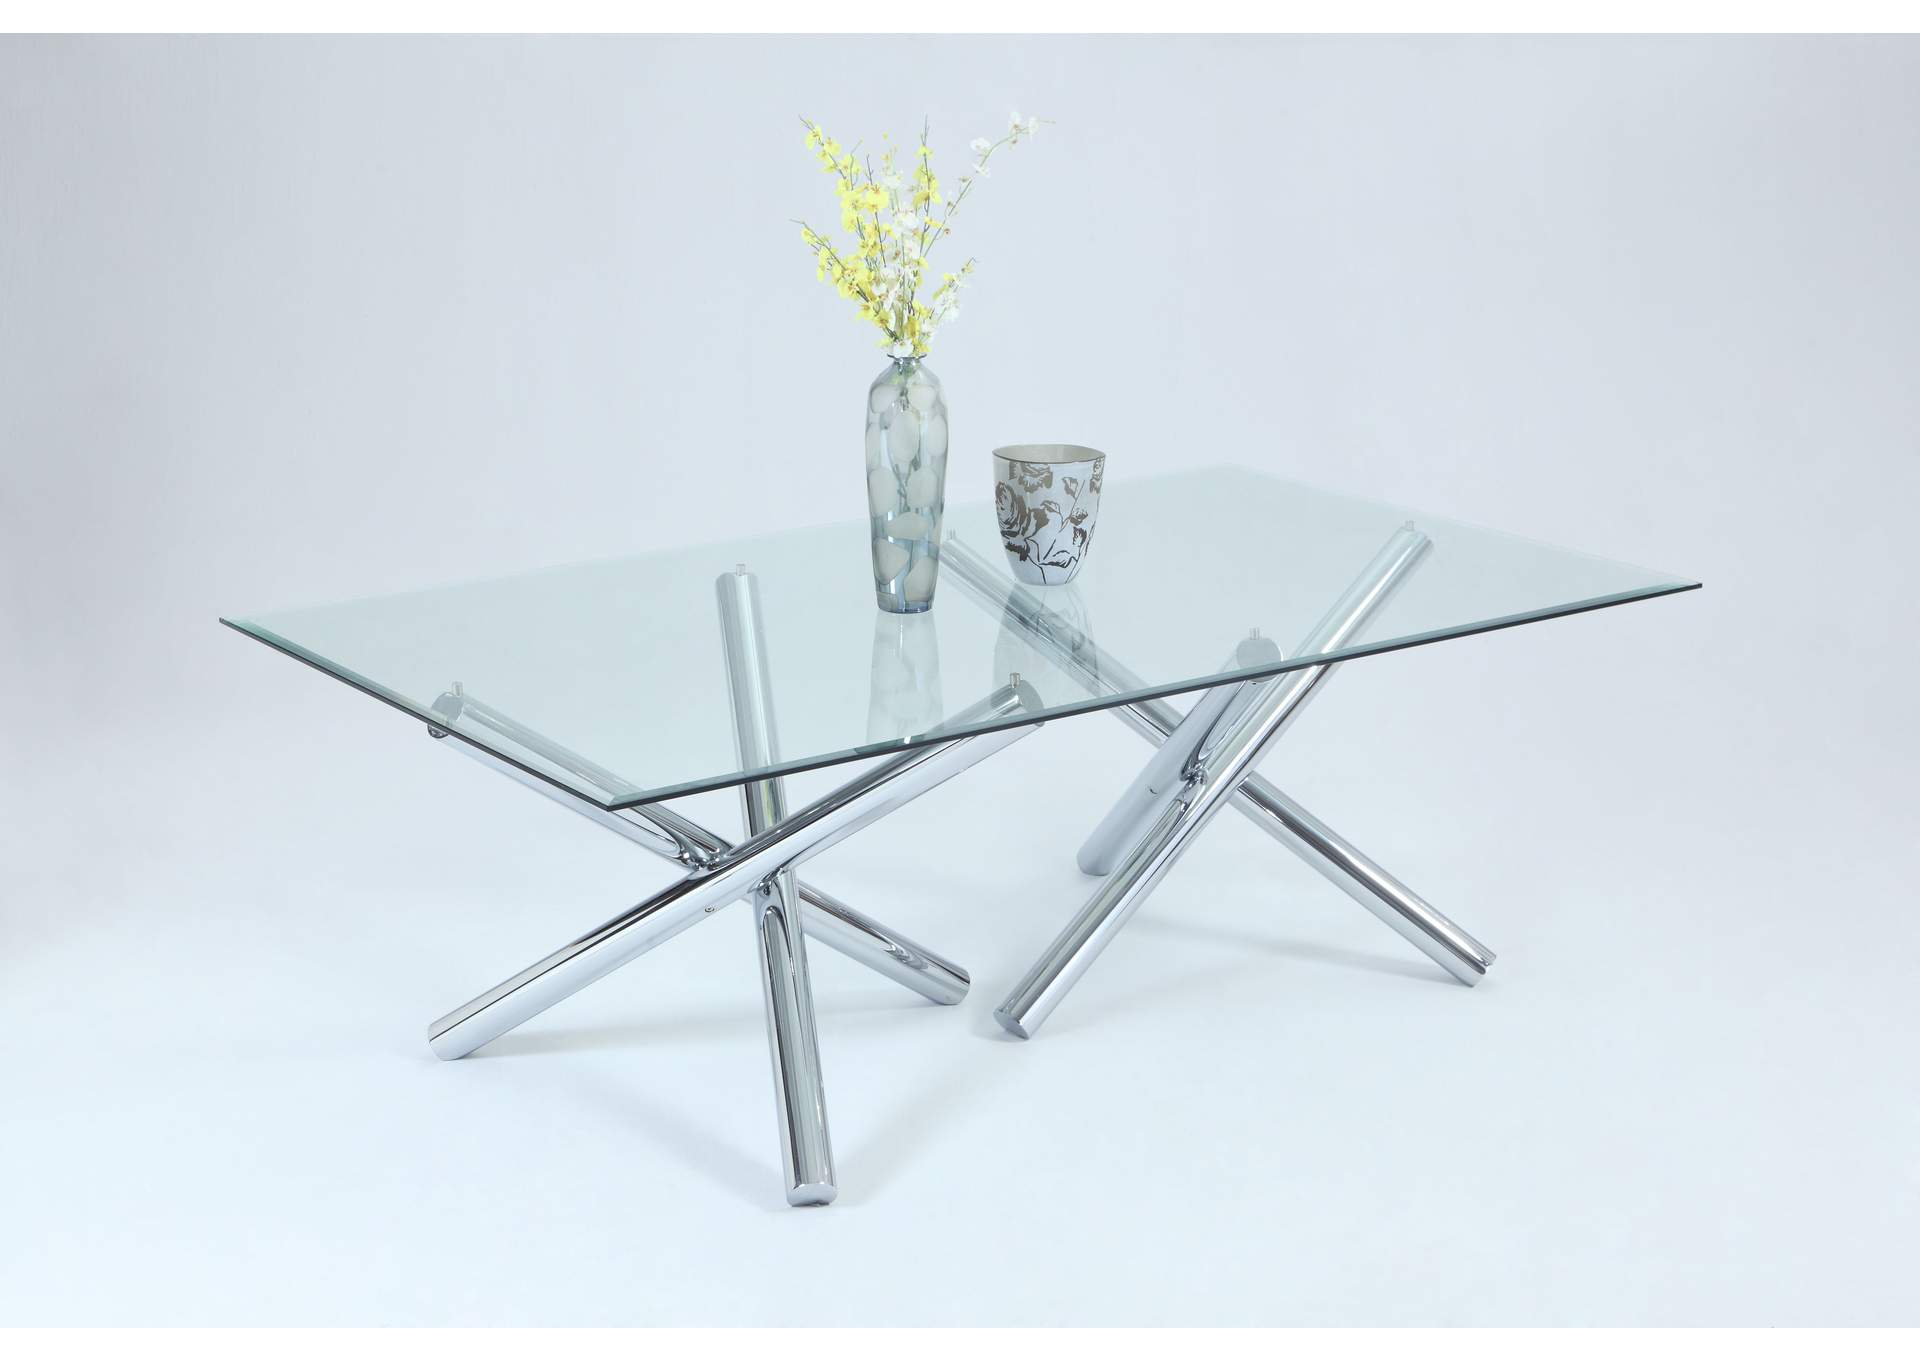 Leatrice Rectangular Glass Table,Chintaly Imports